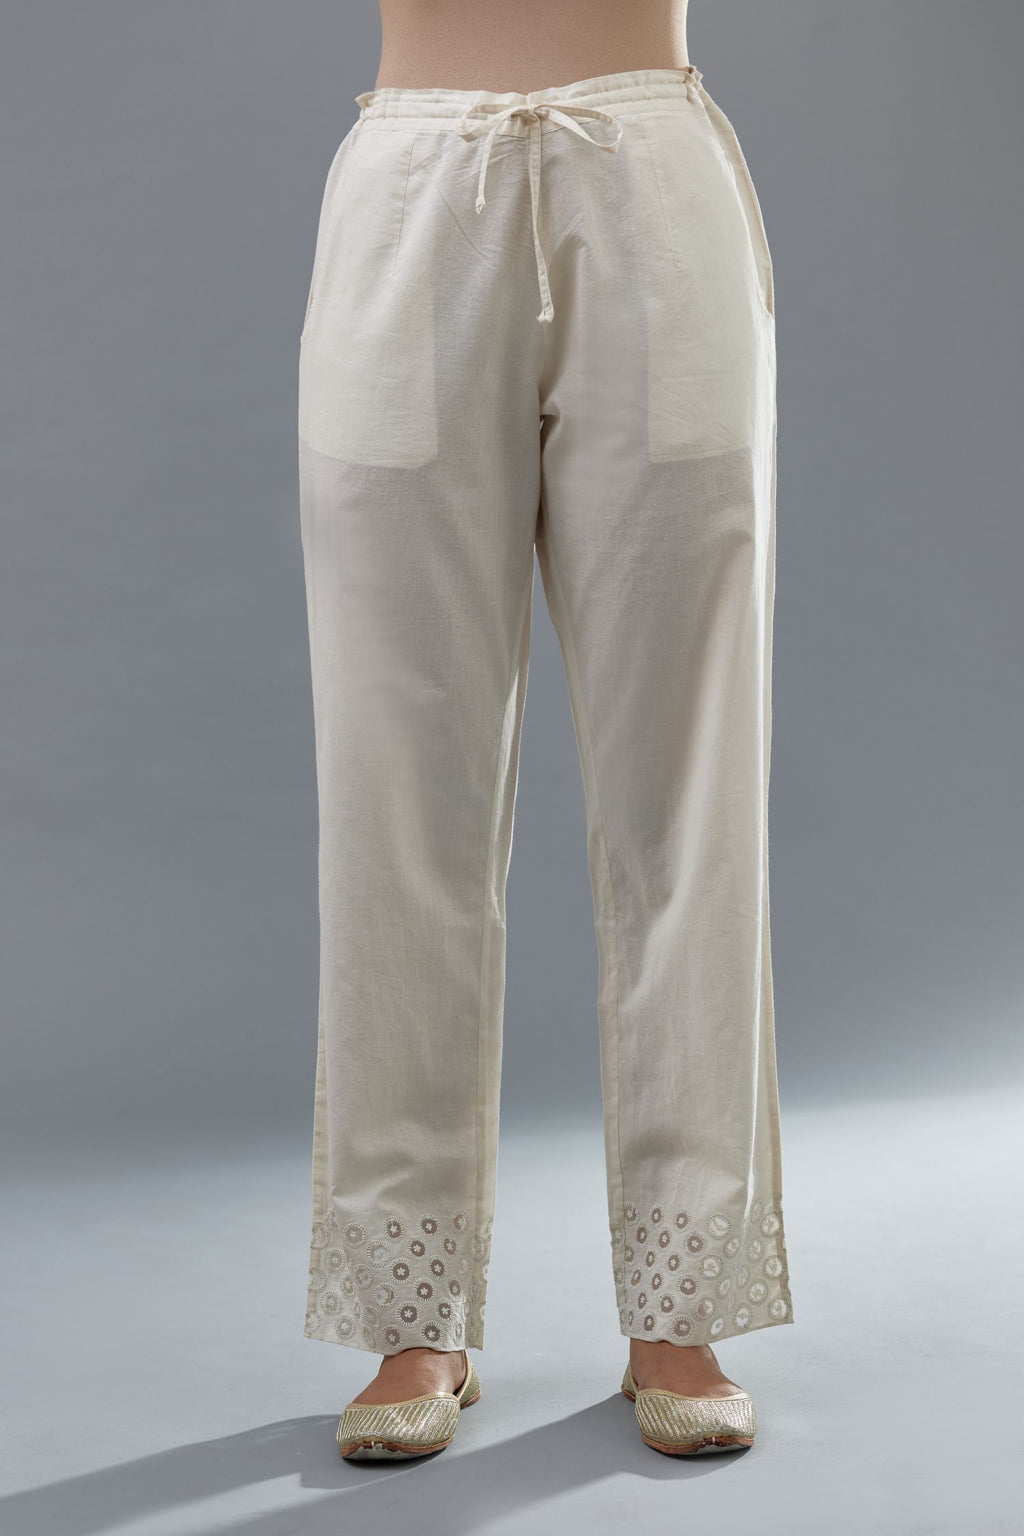 Piroh Pants : Buy Piroh Women's Cotton Solid Straight Trouser Pant White  Online | Nykaa Fashion